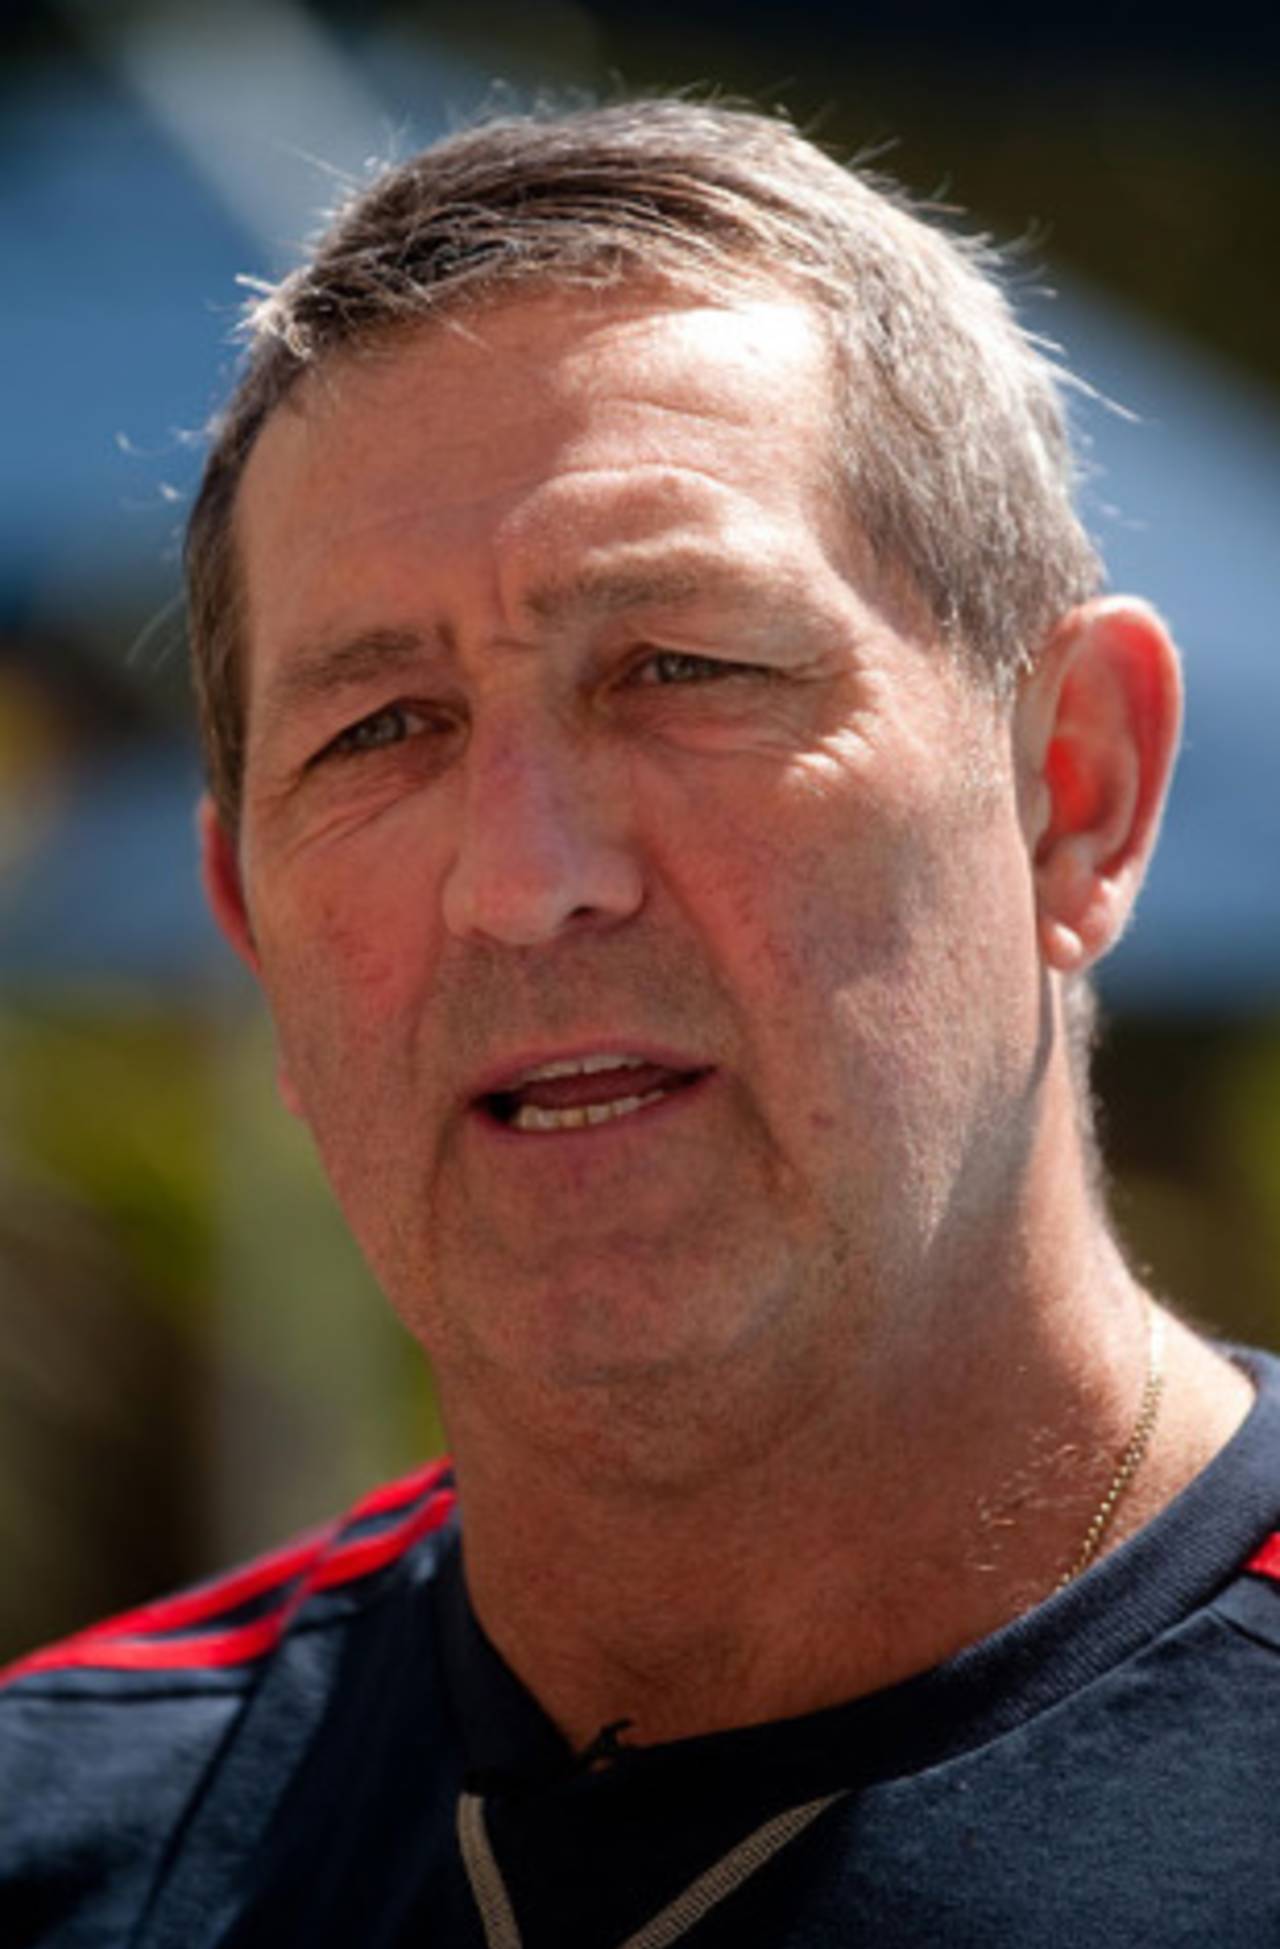 Graham Gooch, asked by Andy Flower to coach England's batsmen, talks to the press, South Africa, December 6, 2009